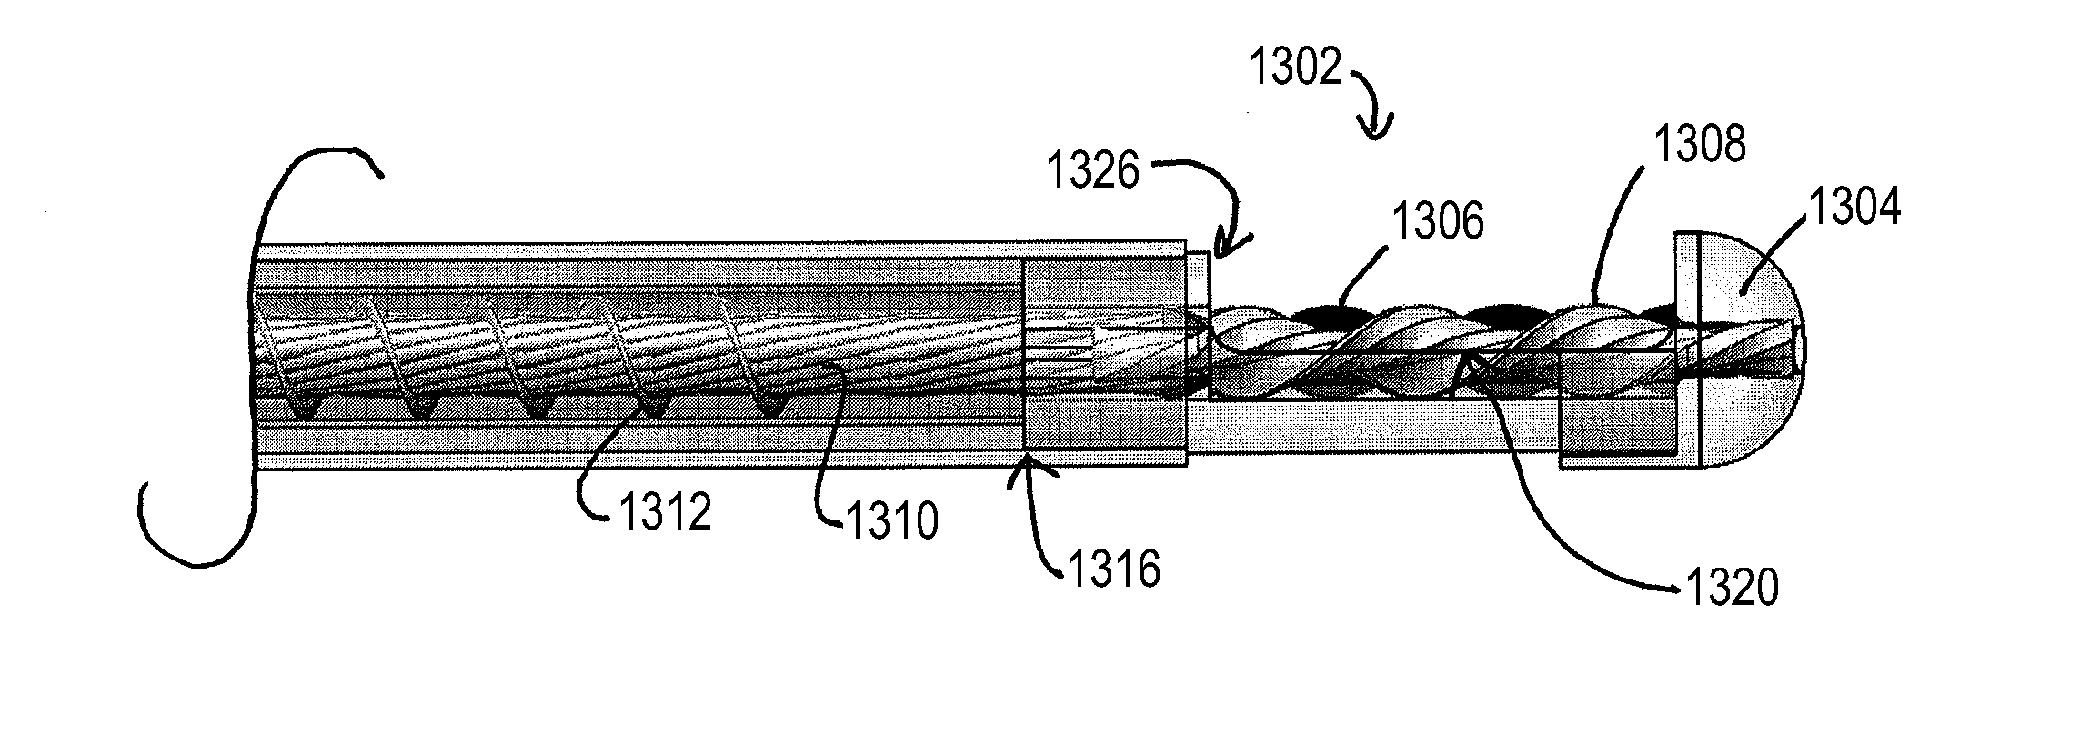 Discectomy devices and related methods